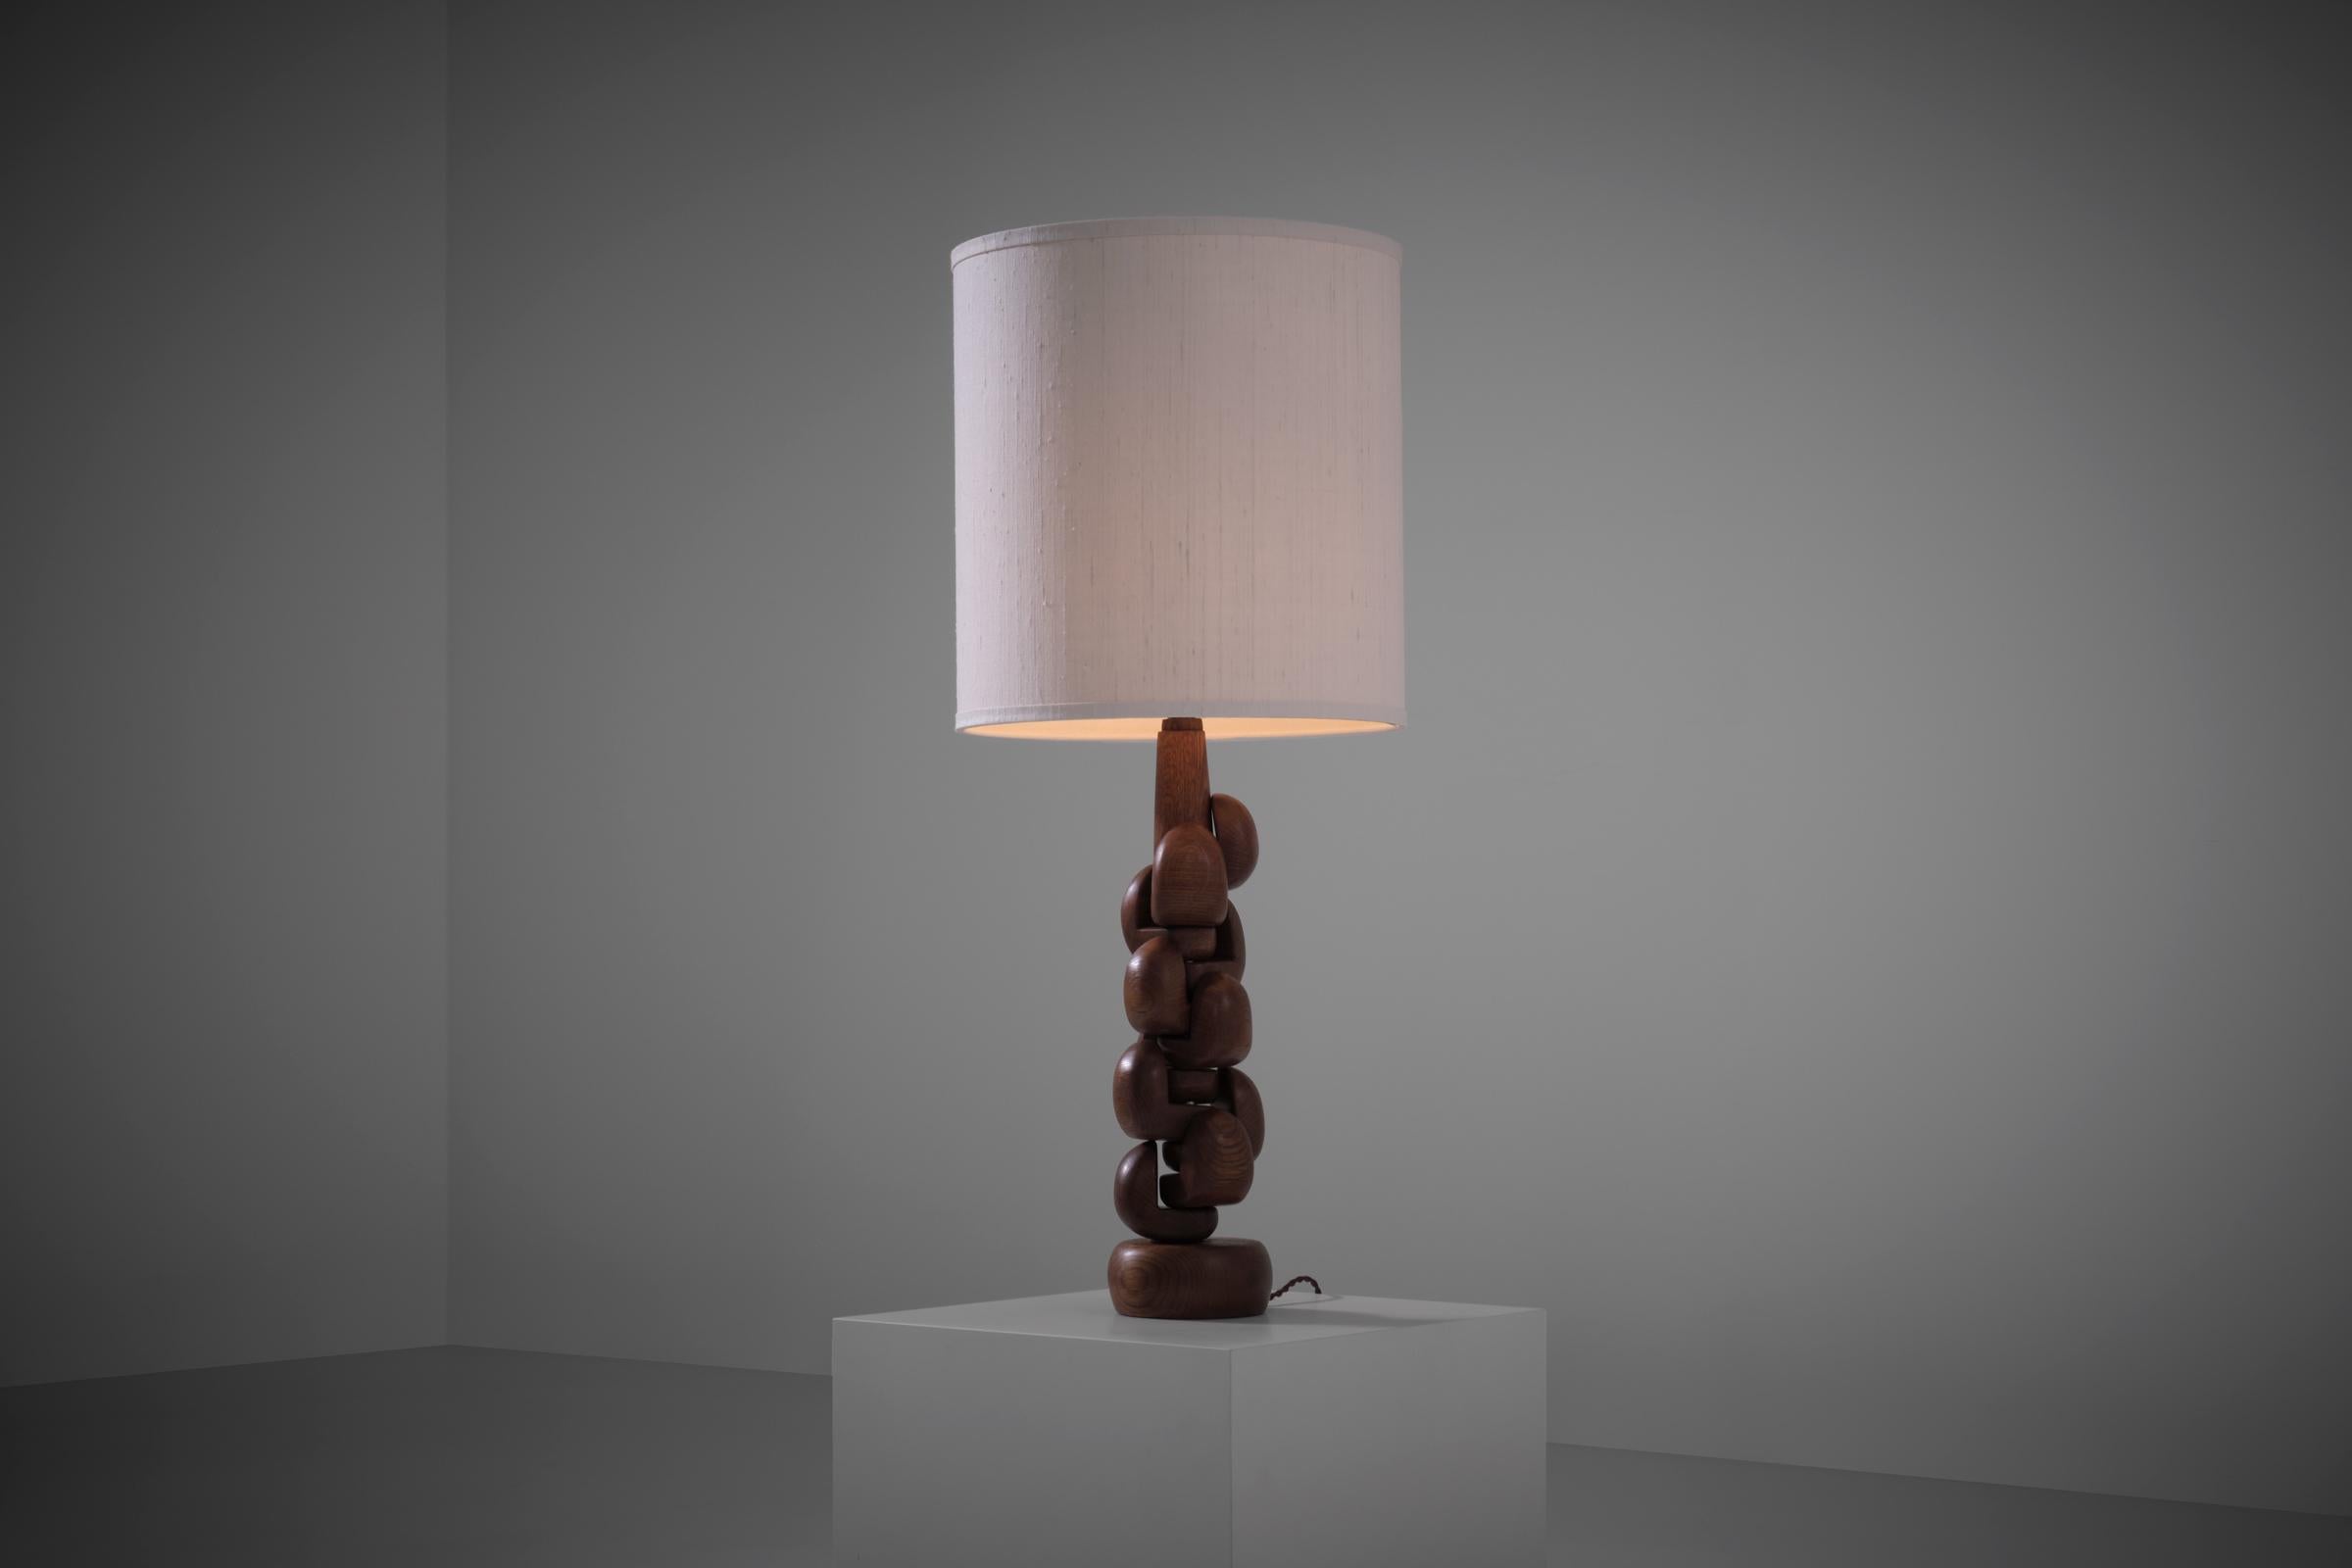 French Sculptural interlocking Oak wooden Table Lamp, France 1960s